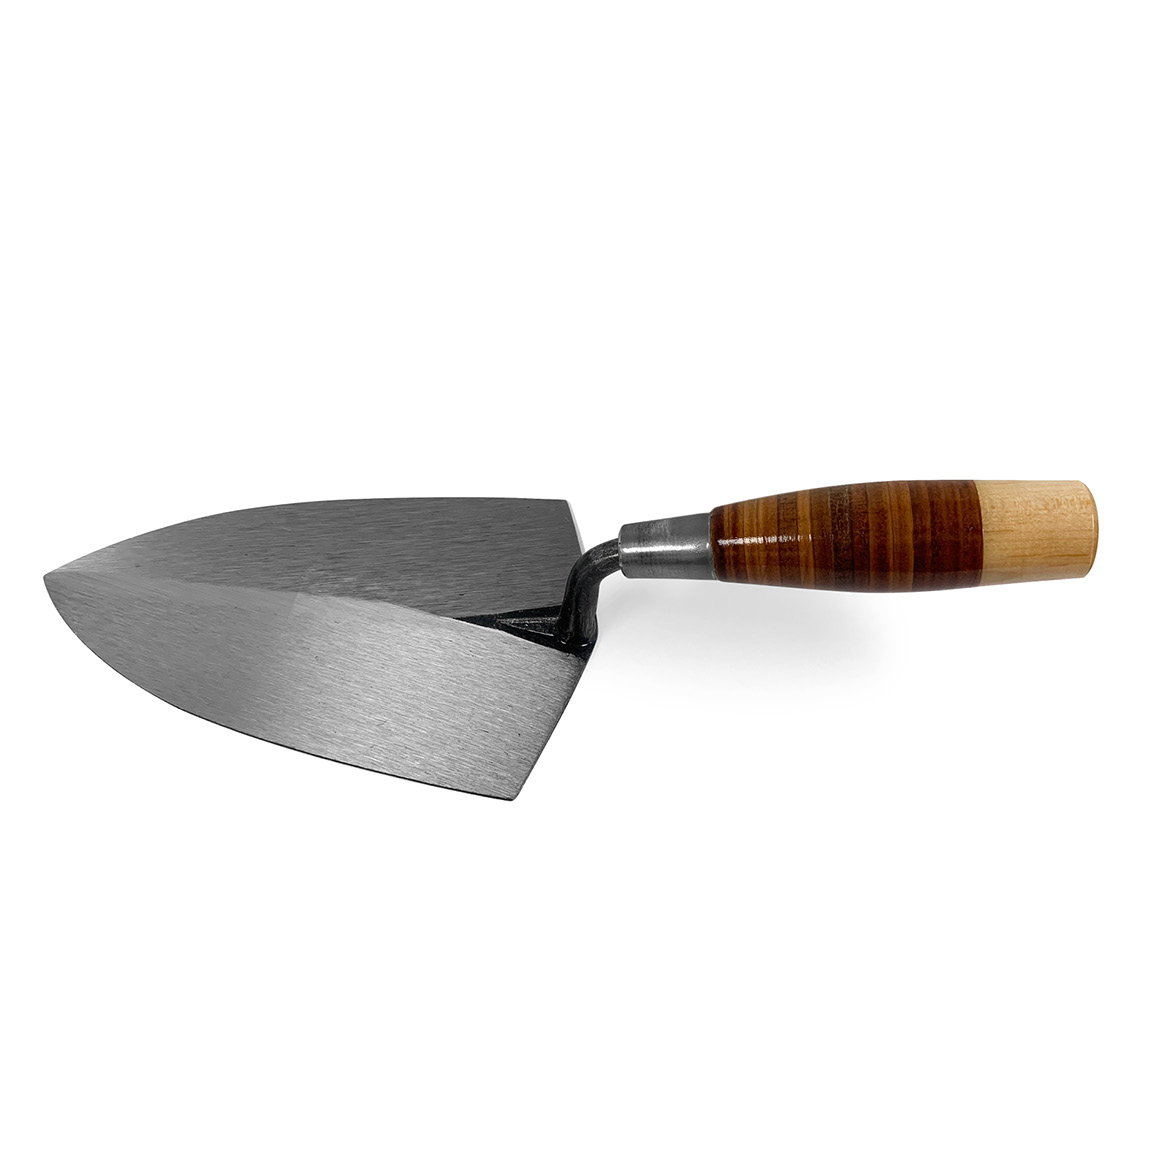 W.Rose 7" Buttering Trowel with Wood Handle. This trowel is made from a single piece of forged steel and is exclusively available in the United Kingdom from Speedcrete. The leather handle bricklayers trowel with be a tool to treasure.